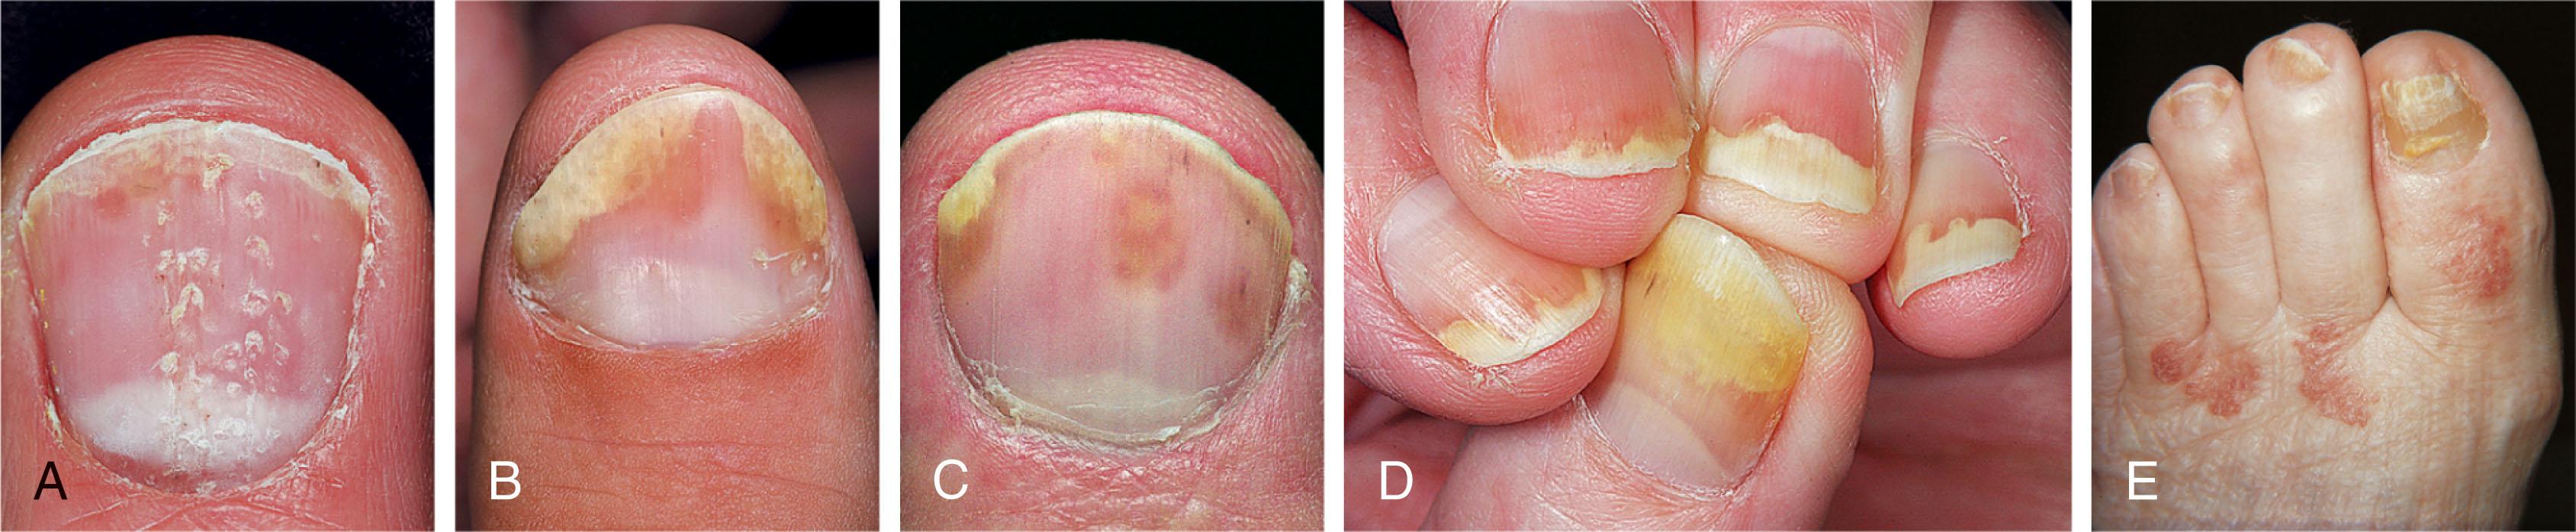 Fig. 14-4, Psoriatic toenail dystrophy. The nail is thick, discolored, and distorted because of psoriasis of the nail matrix. The symmetry is striking, and the skin may also be involved. A , Psoriatic pits can occur in a linear fashion and may occur along longitudinal lines. B , Psoriasis of the nail can produce separation of the nail from the nail bed and an accumulation of subungual debris. The accumulation of serum beneath the nail may form what is called an oil spot . C , Oil spot lesions are brown stains seen on the nail. D , Separation of the nail plate and accumulation of subungual debris is common. These changes can also occur after nail trauma and can occur with multiple nail involvement. E , Psoriatic involvement of both the nails and skin with several plaques on the dorsal surface.